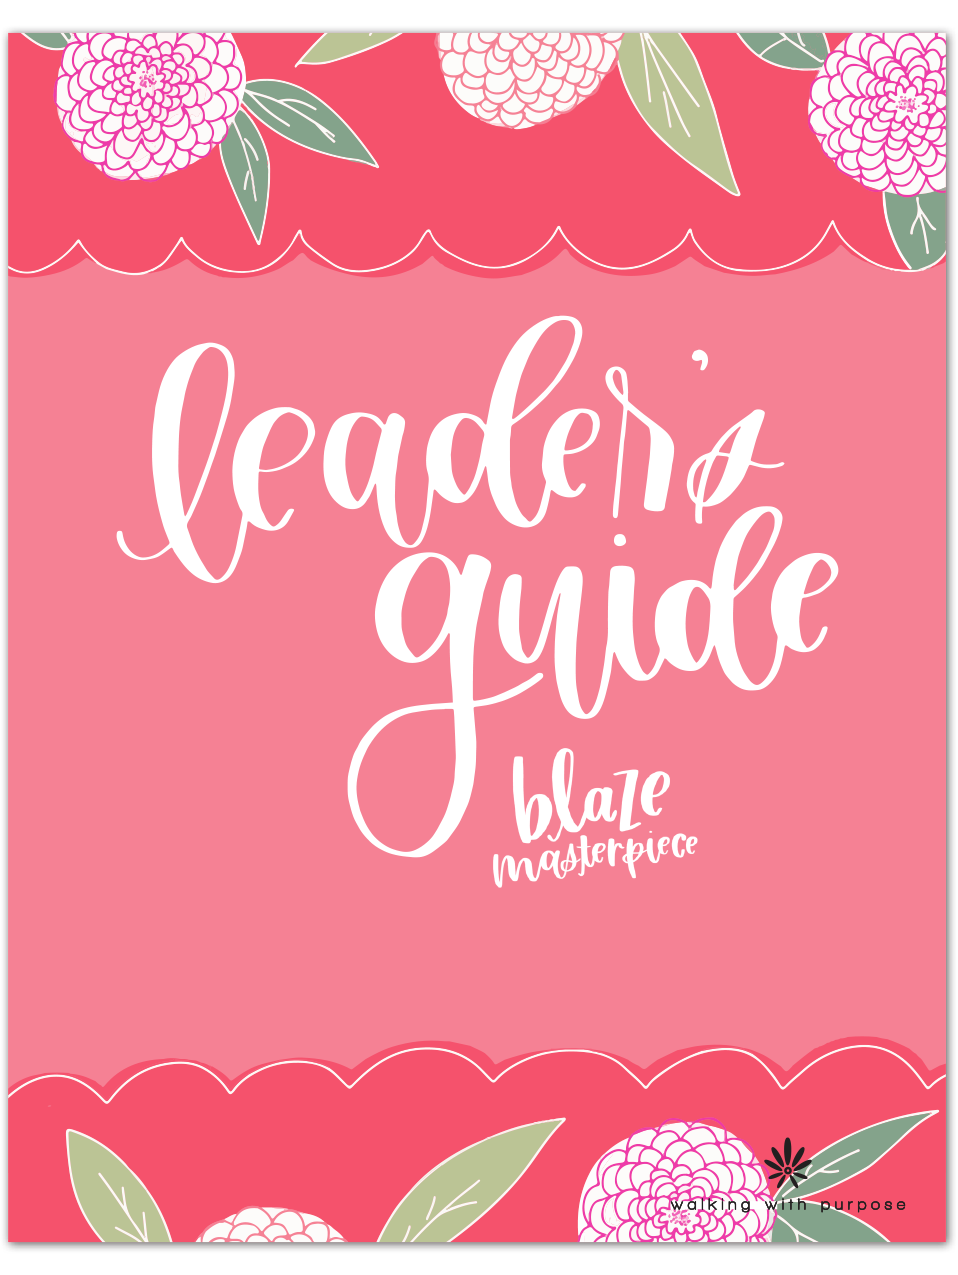 BLAZE Masterpiece leaders guide cover